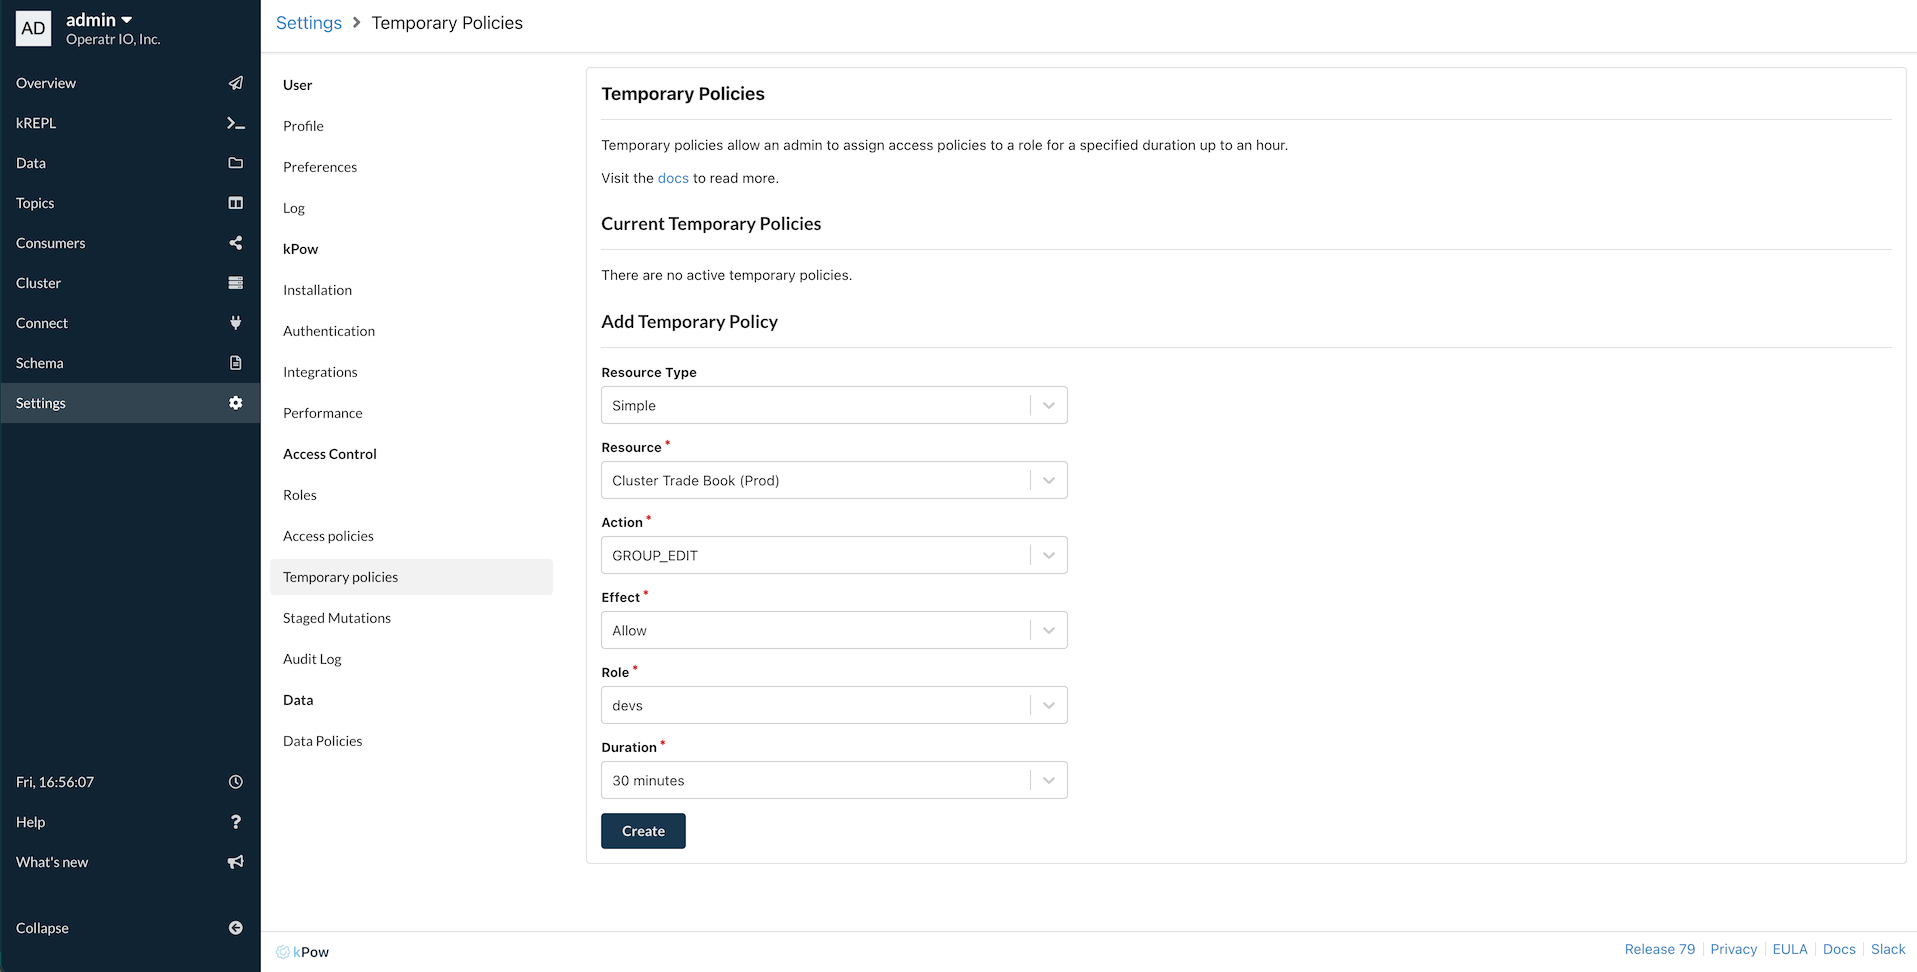 Temporary policies UI in Kpow